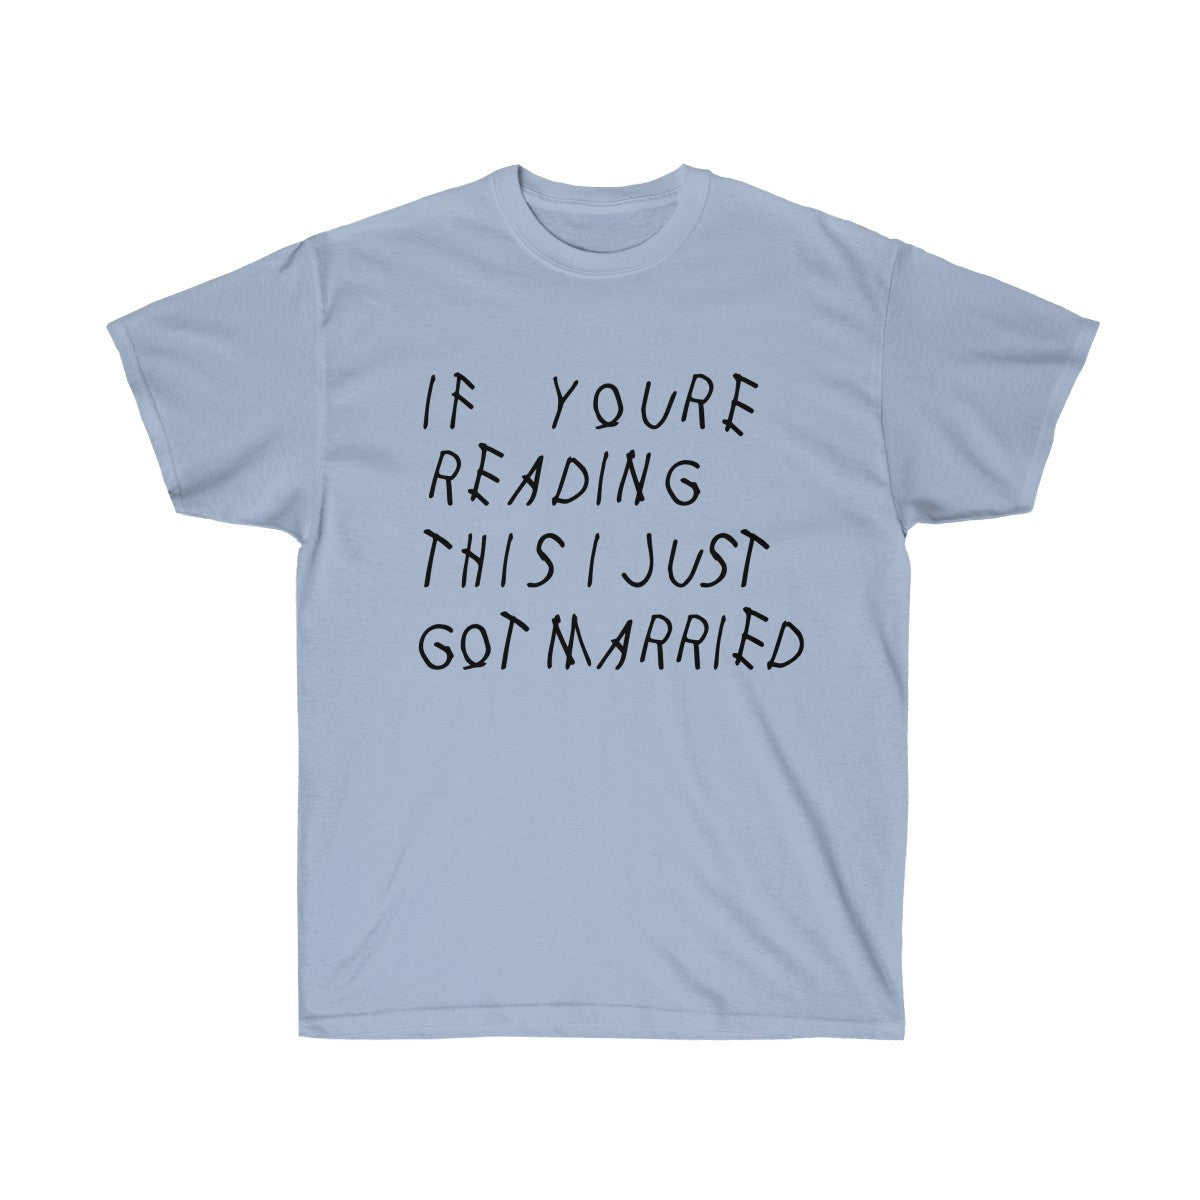 If your reading this I Just Got Married Drake inspired Unisex Ultra Cotton Tee-Light Blue-S-Archethype